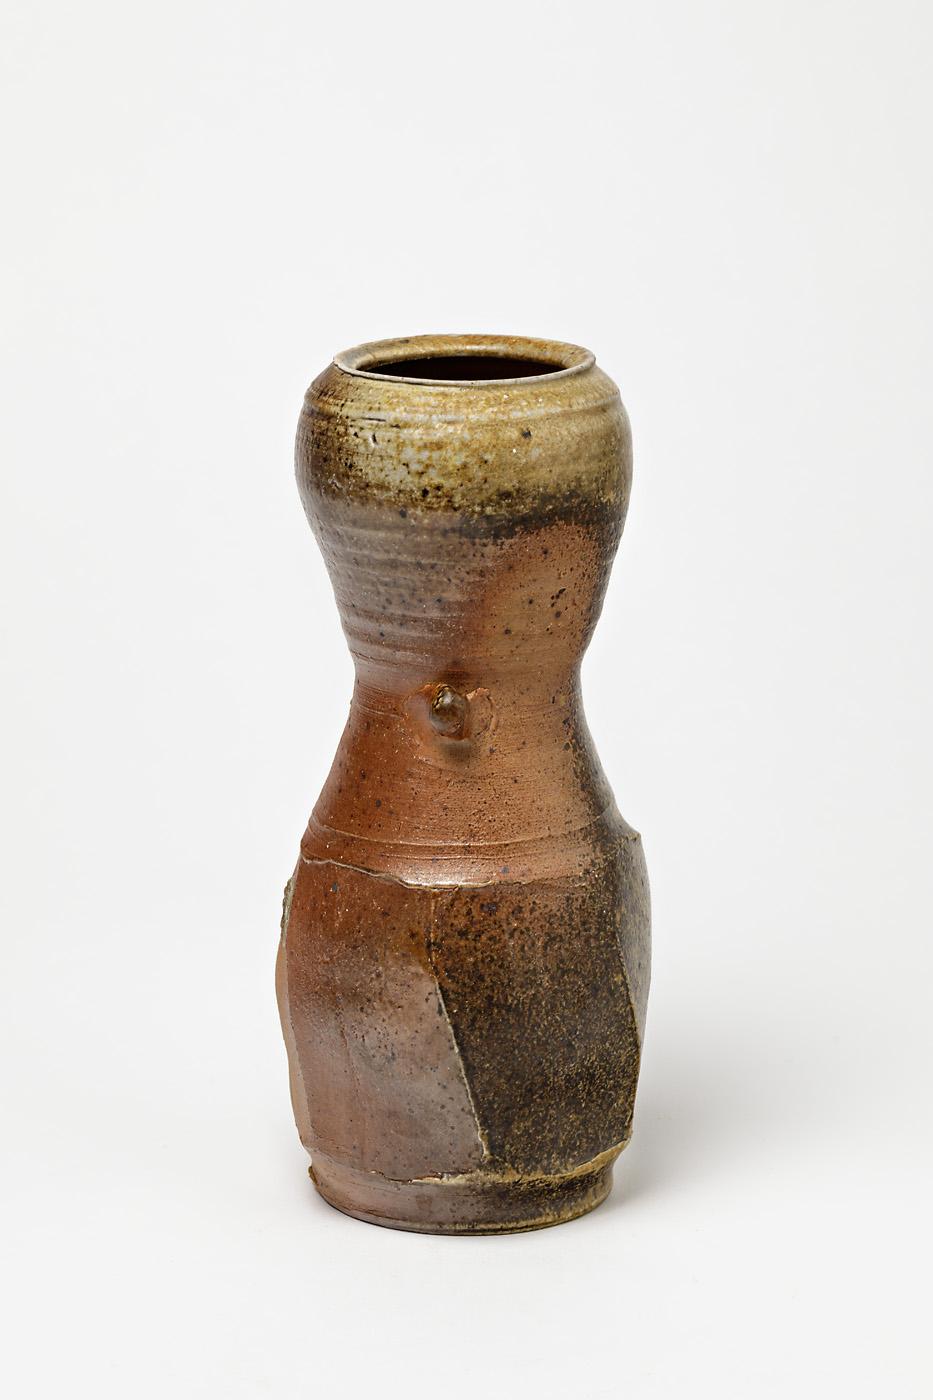 Decorative brown Ceramic Vase by Steen Kepp Danish Artist Pottery In Excellent Condition For Sale In Neuilly-en- sancerre, FR